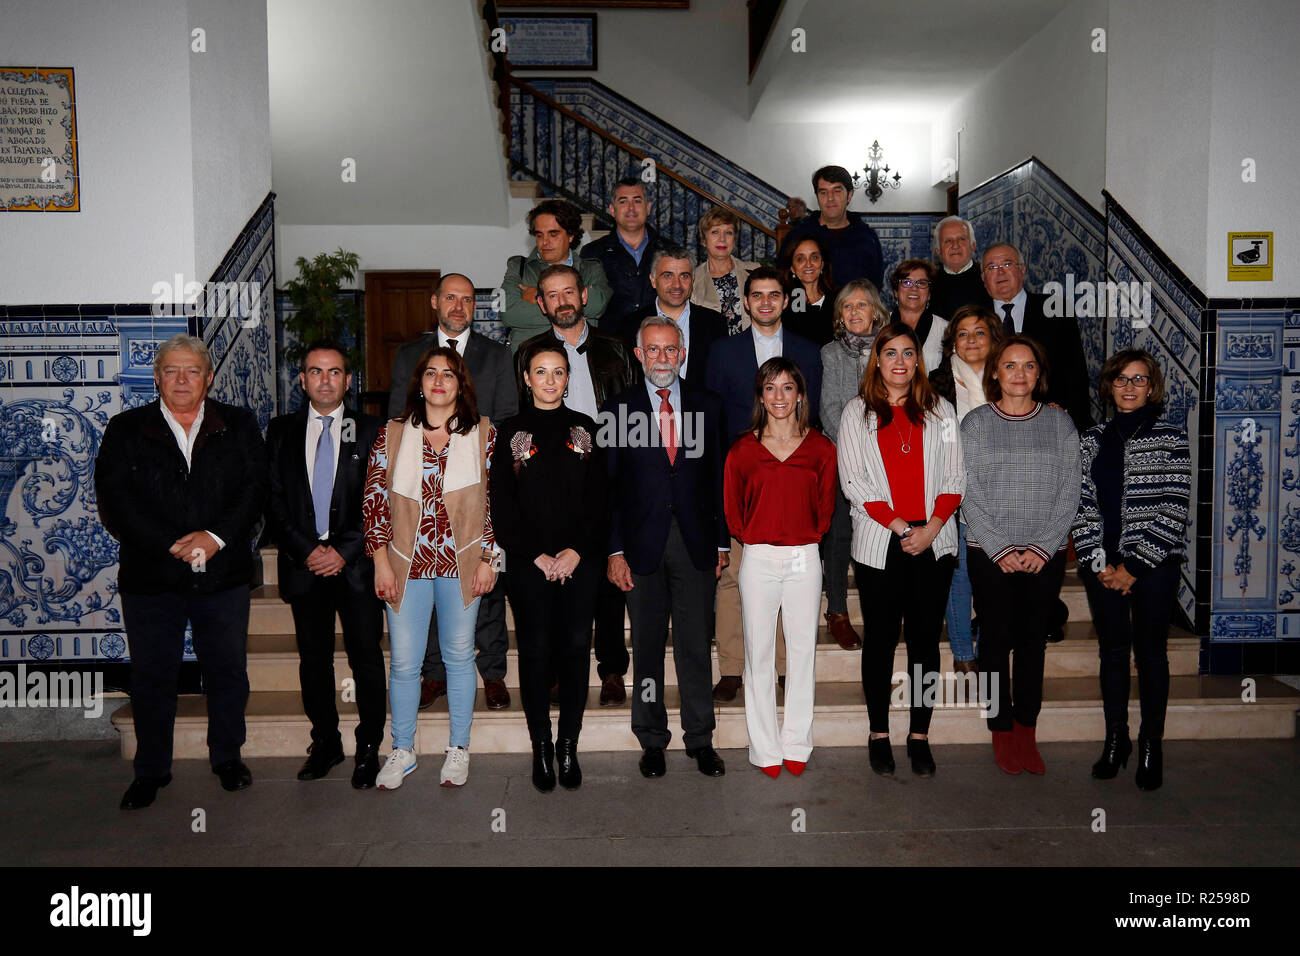 Spanish Karateka Sandra Sanchez seen posing for a photo with members of the corporation during the celebrations at her home town in Talavera de la Reina. Stock Photo